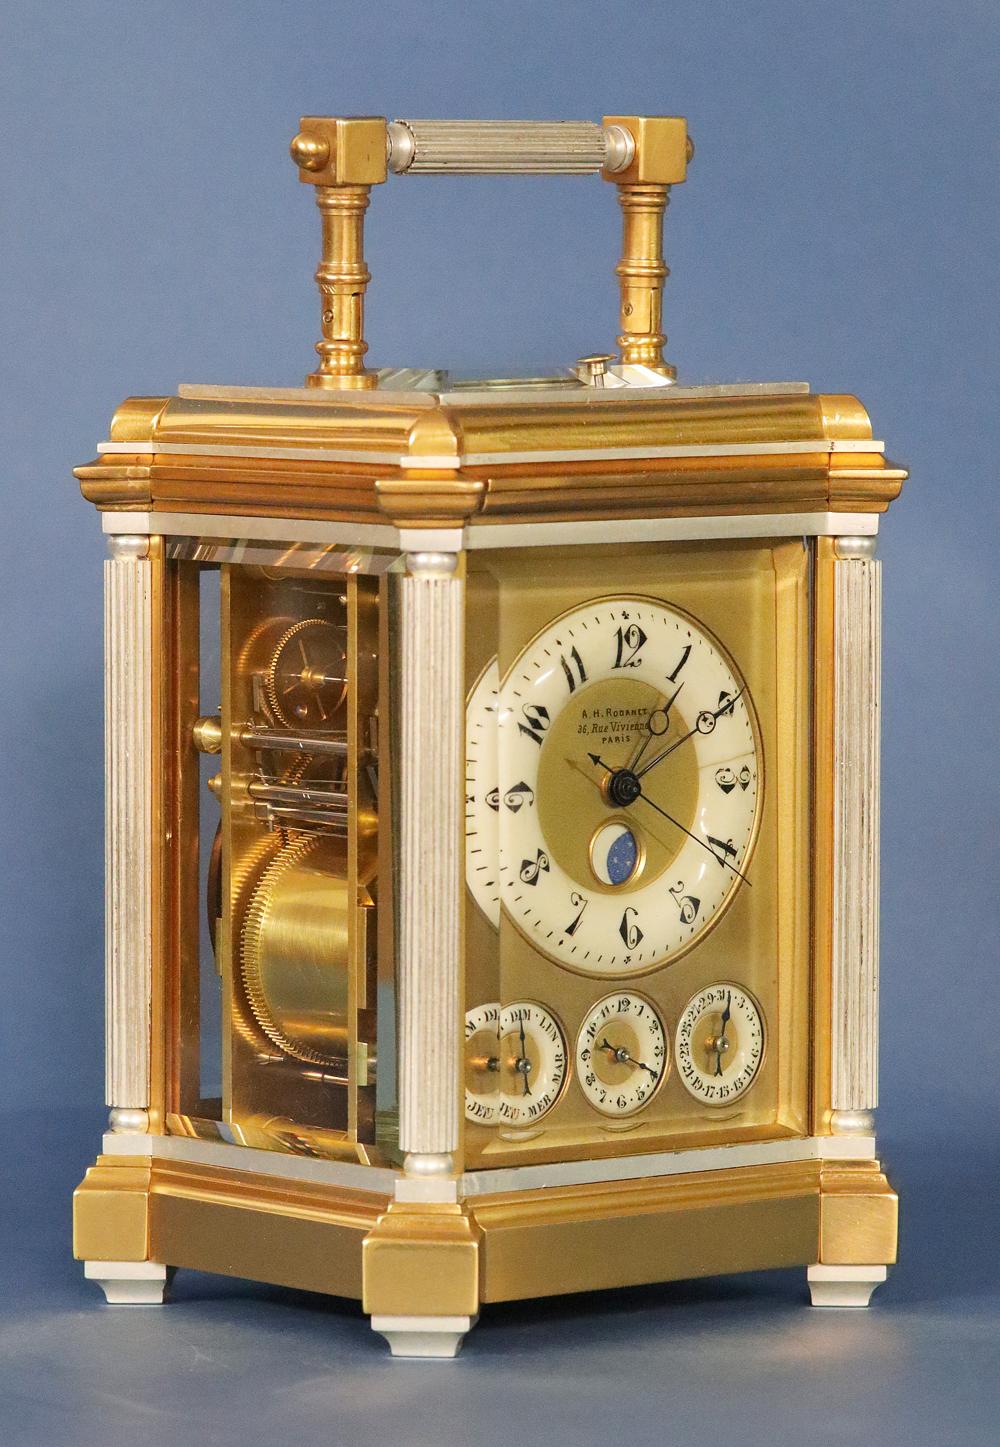 Gilt c.1895 French Carriage Clock with Complications by Rodanet